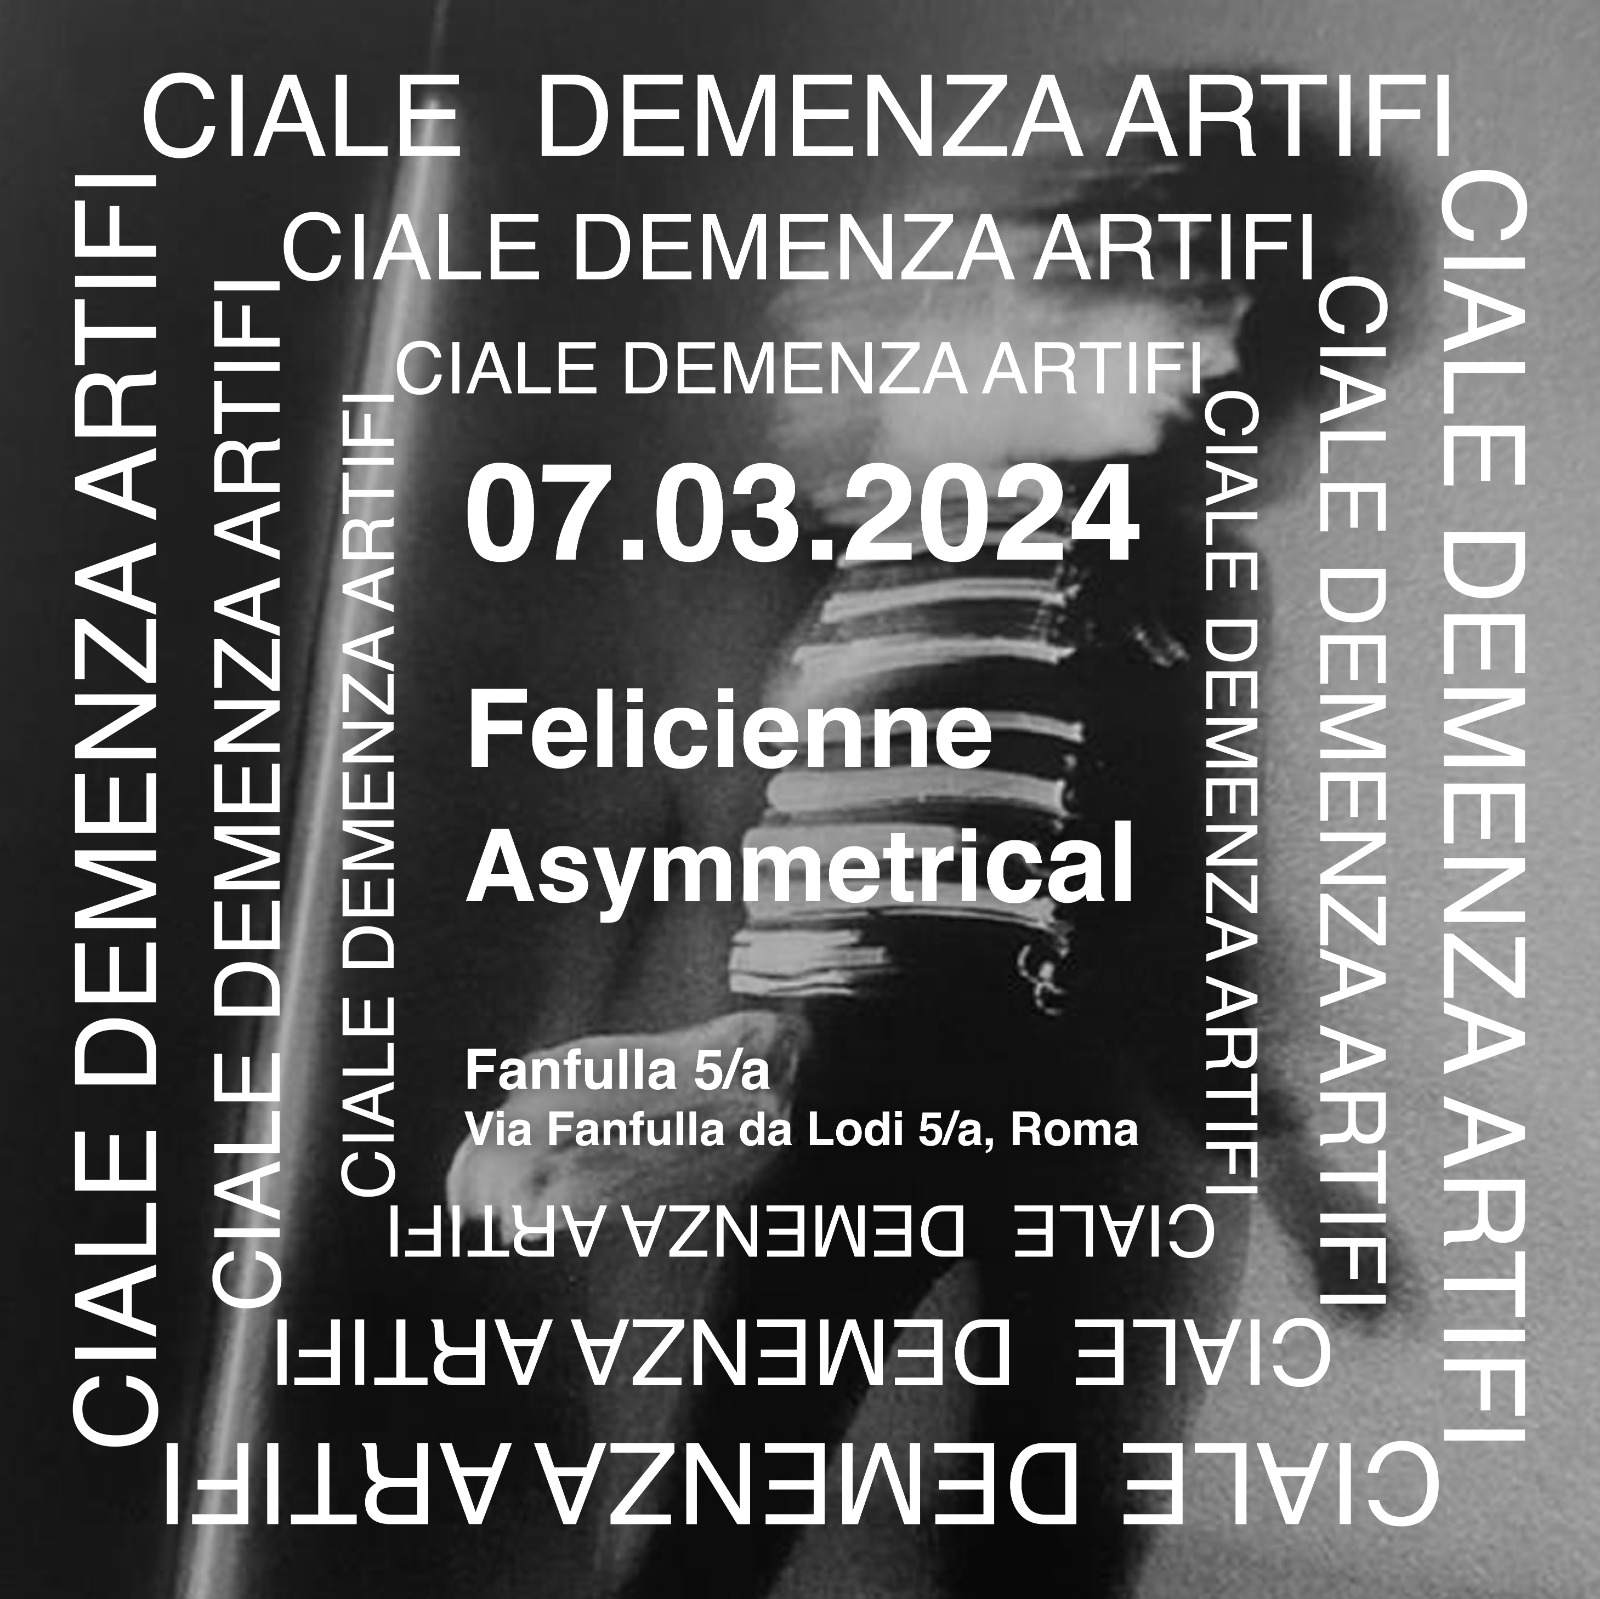 Demenza Artificiale with Asymmetrical & Felicienne - フライヤー表